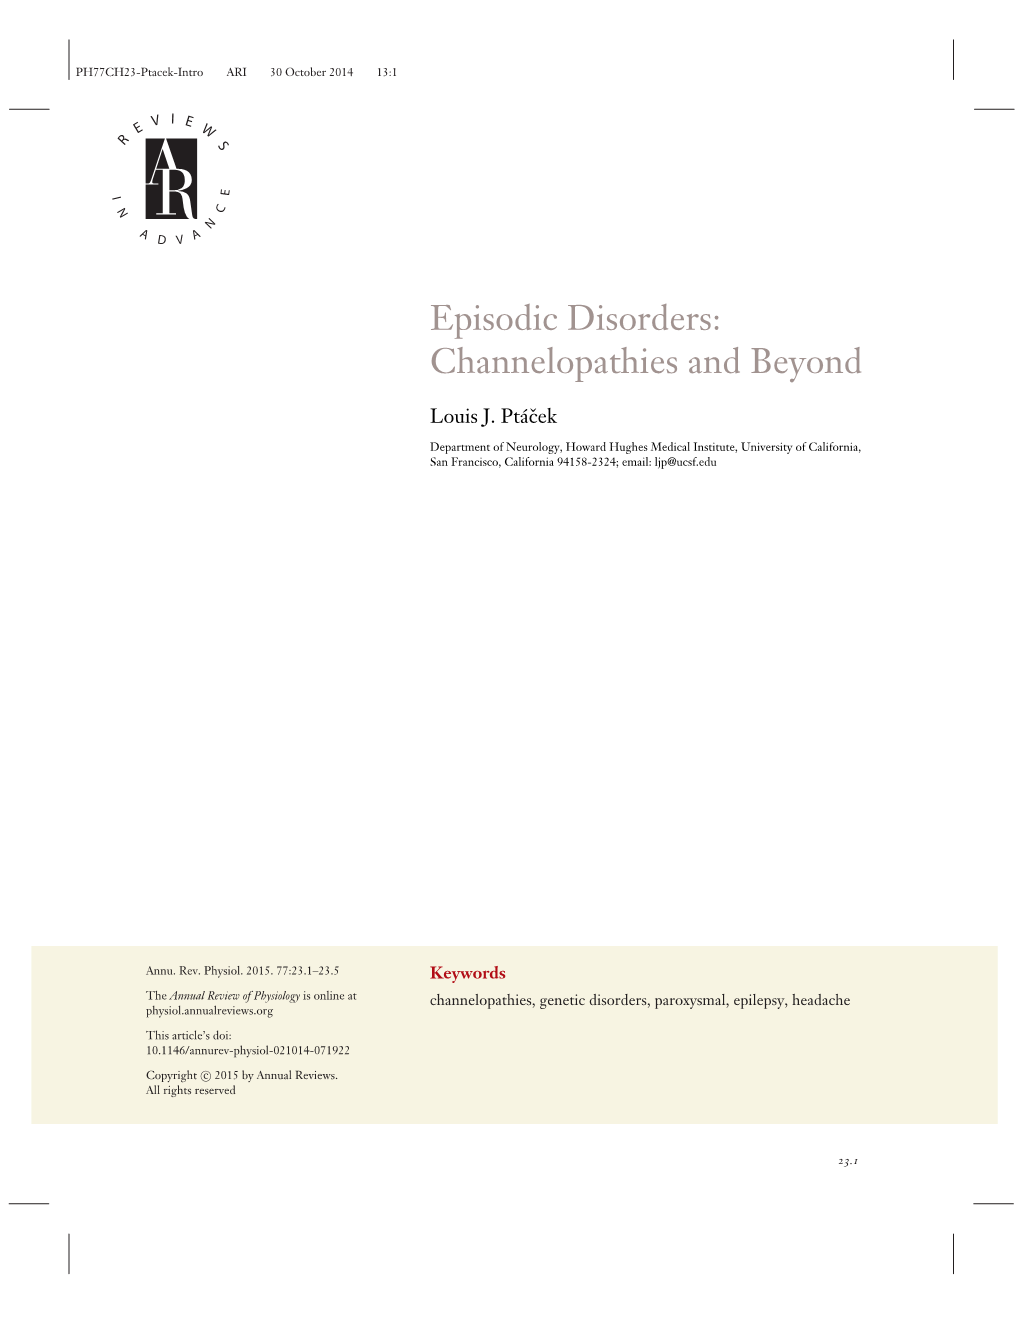 Episodic Disorders: Channelopathies and Beyond